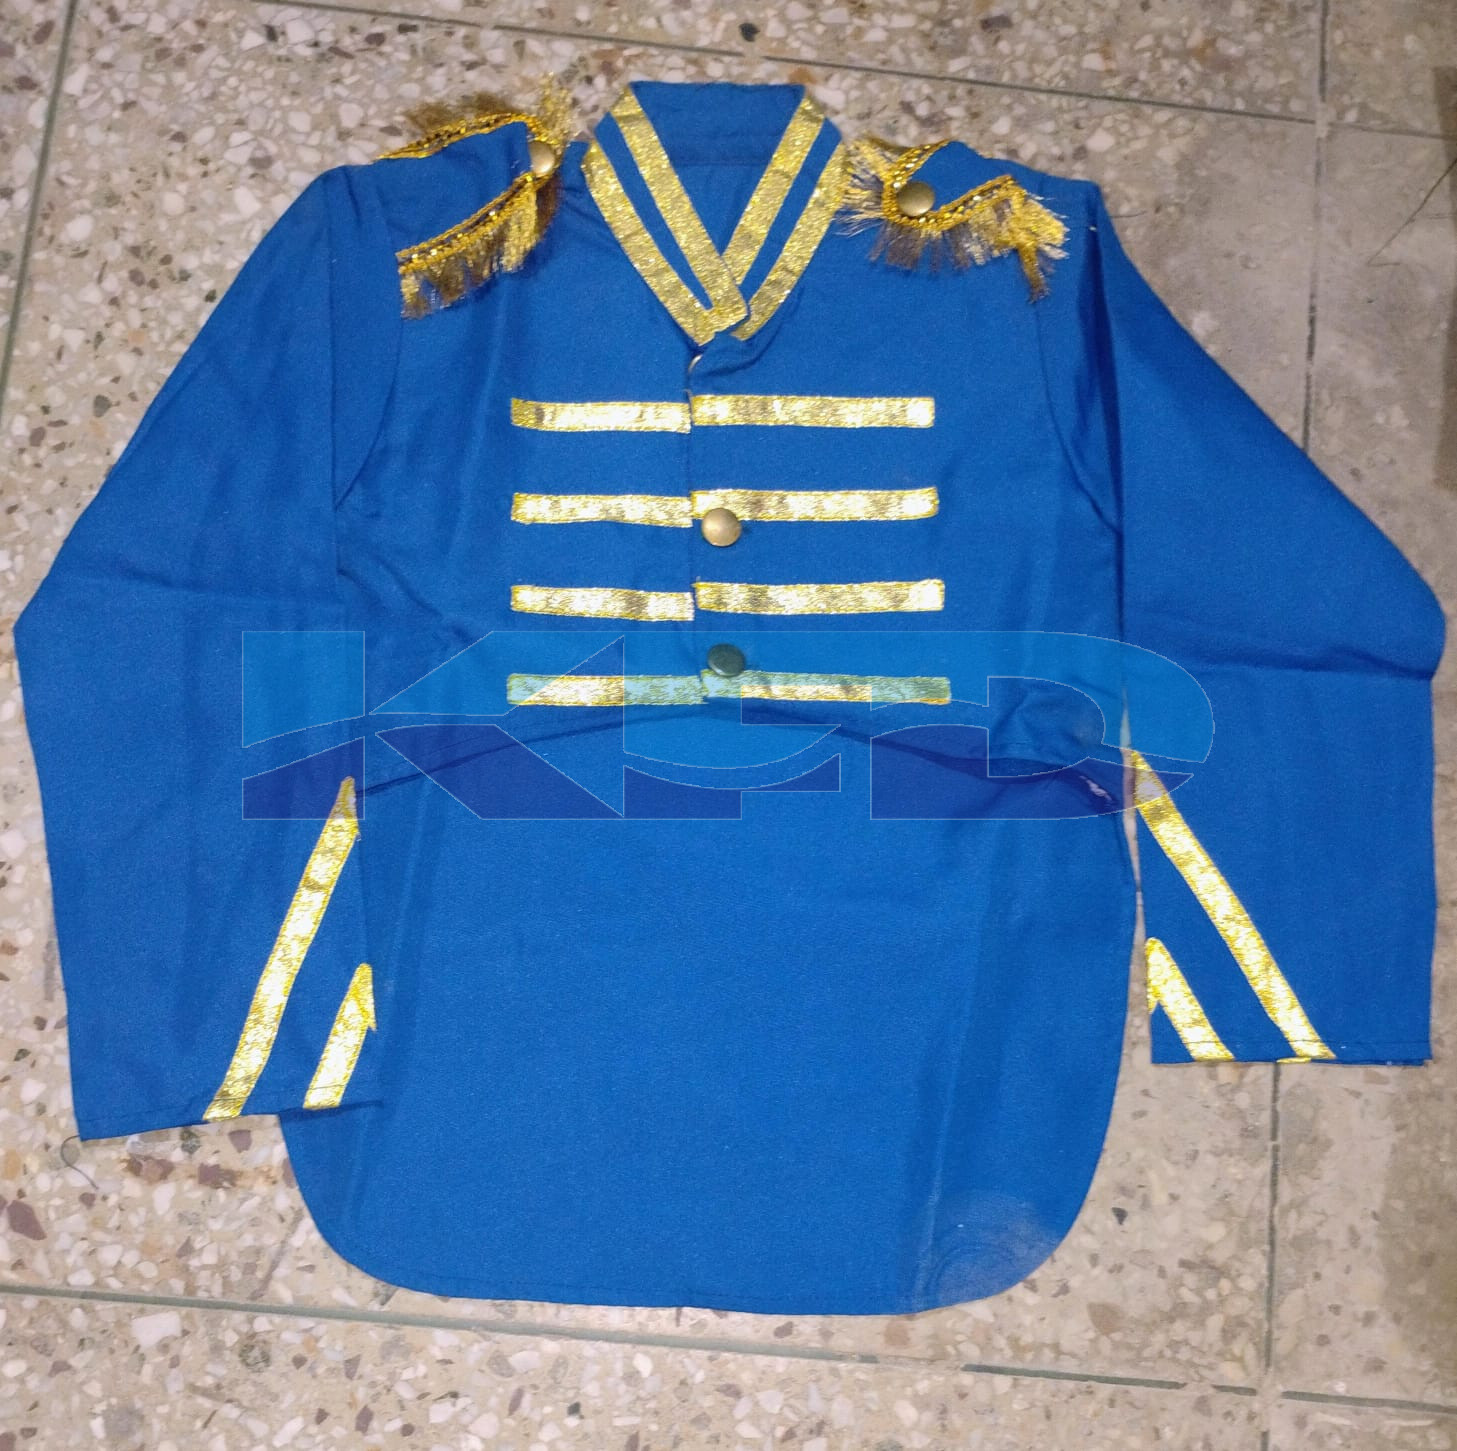 British Guard Jacket Blue Fancy Dress For Kids,Costume For Annual Function/Theme Party/Competition/Stage Shows Dress